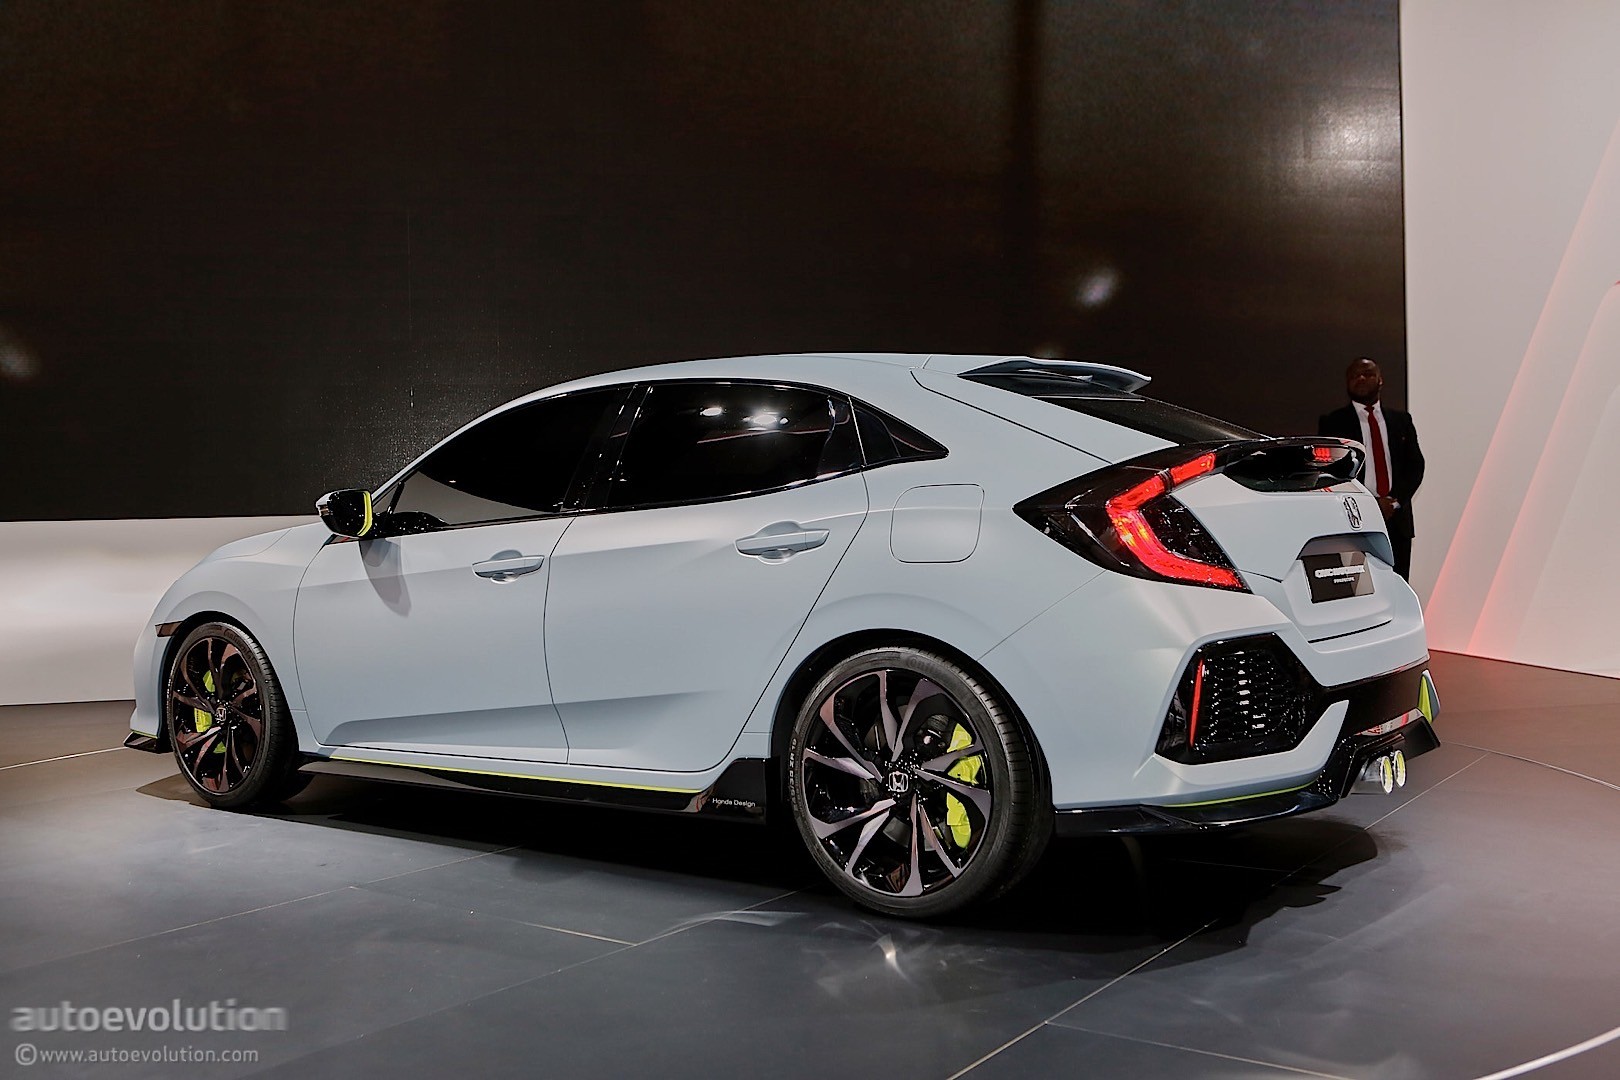 honda-civic-hatchback-coming-to-new-york-civic-si-and-new-type-r-in-2017_16.jpg